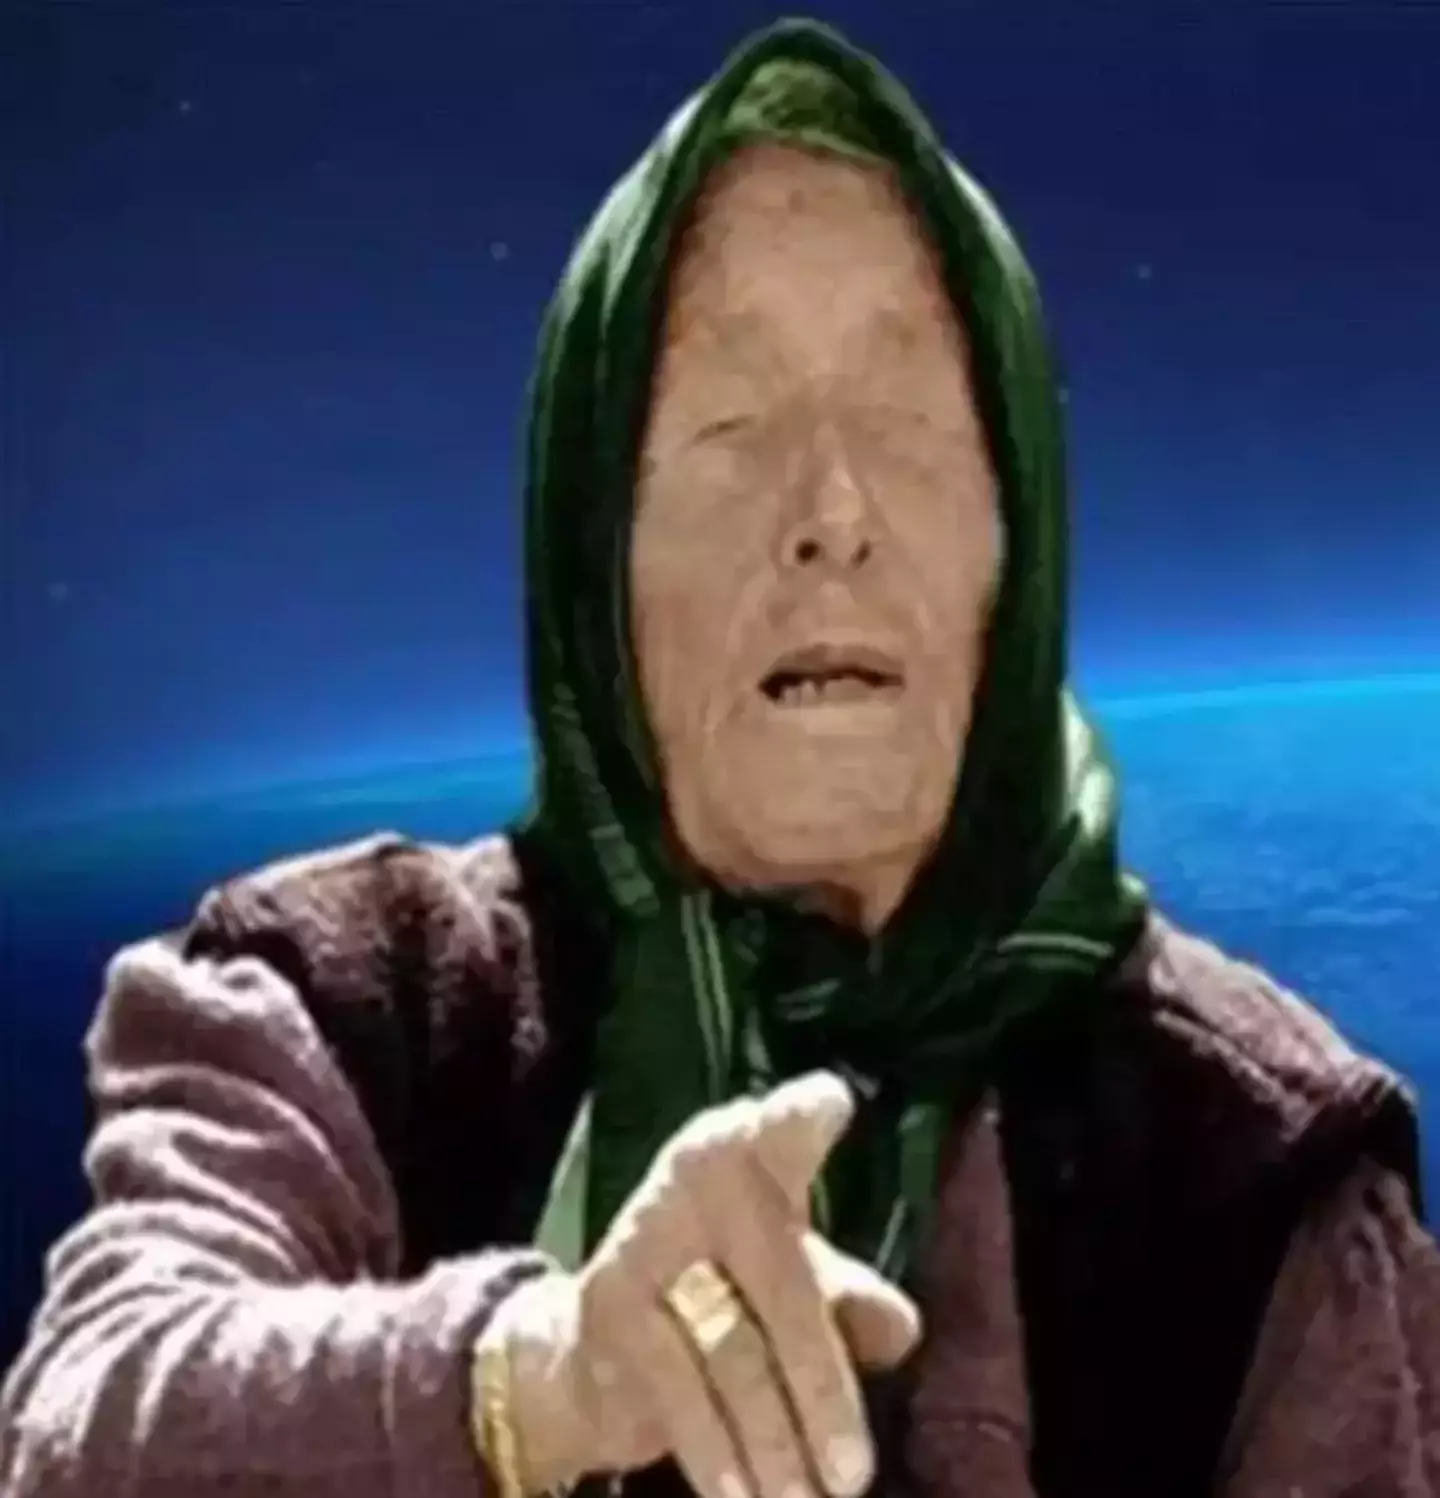 Baba Vanga's predictions go up until the year 5079. (Facebook)